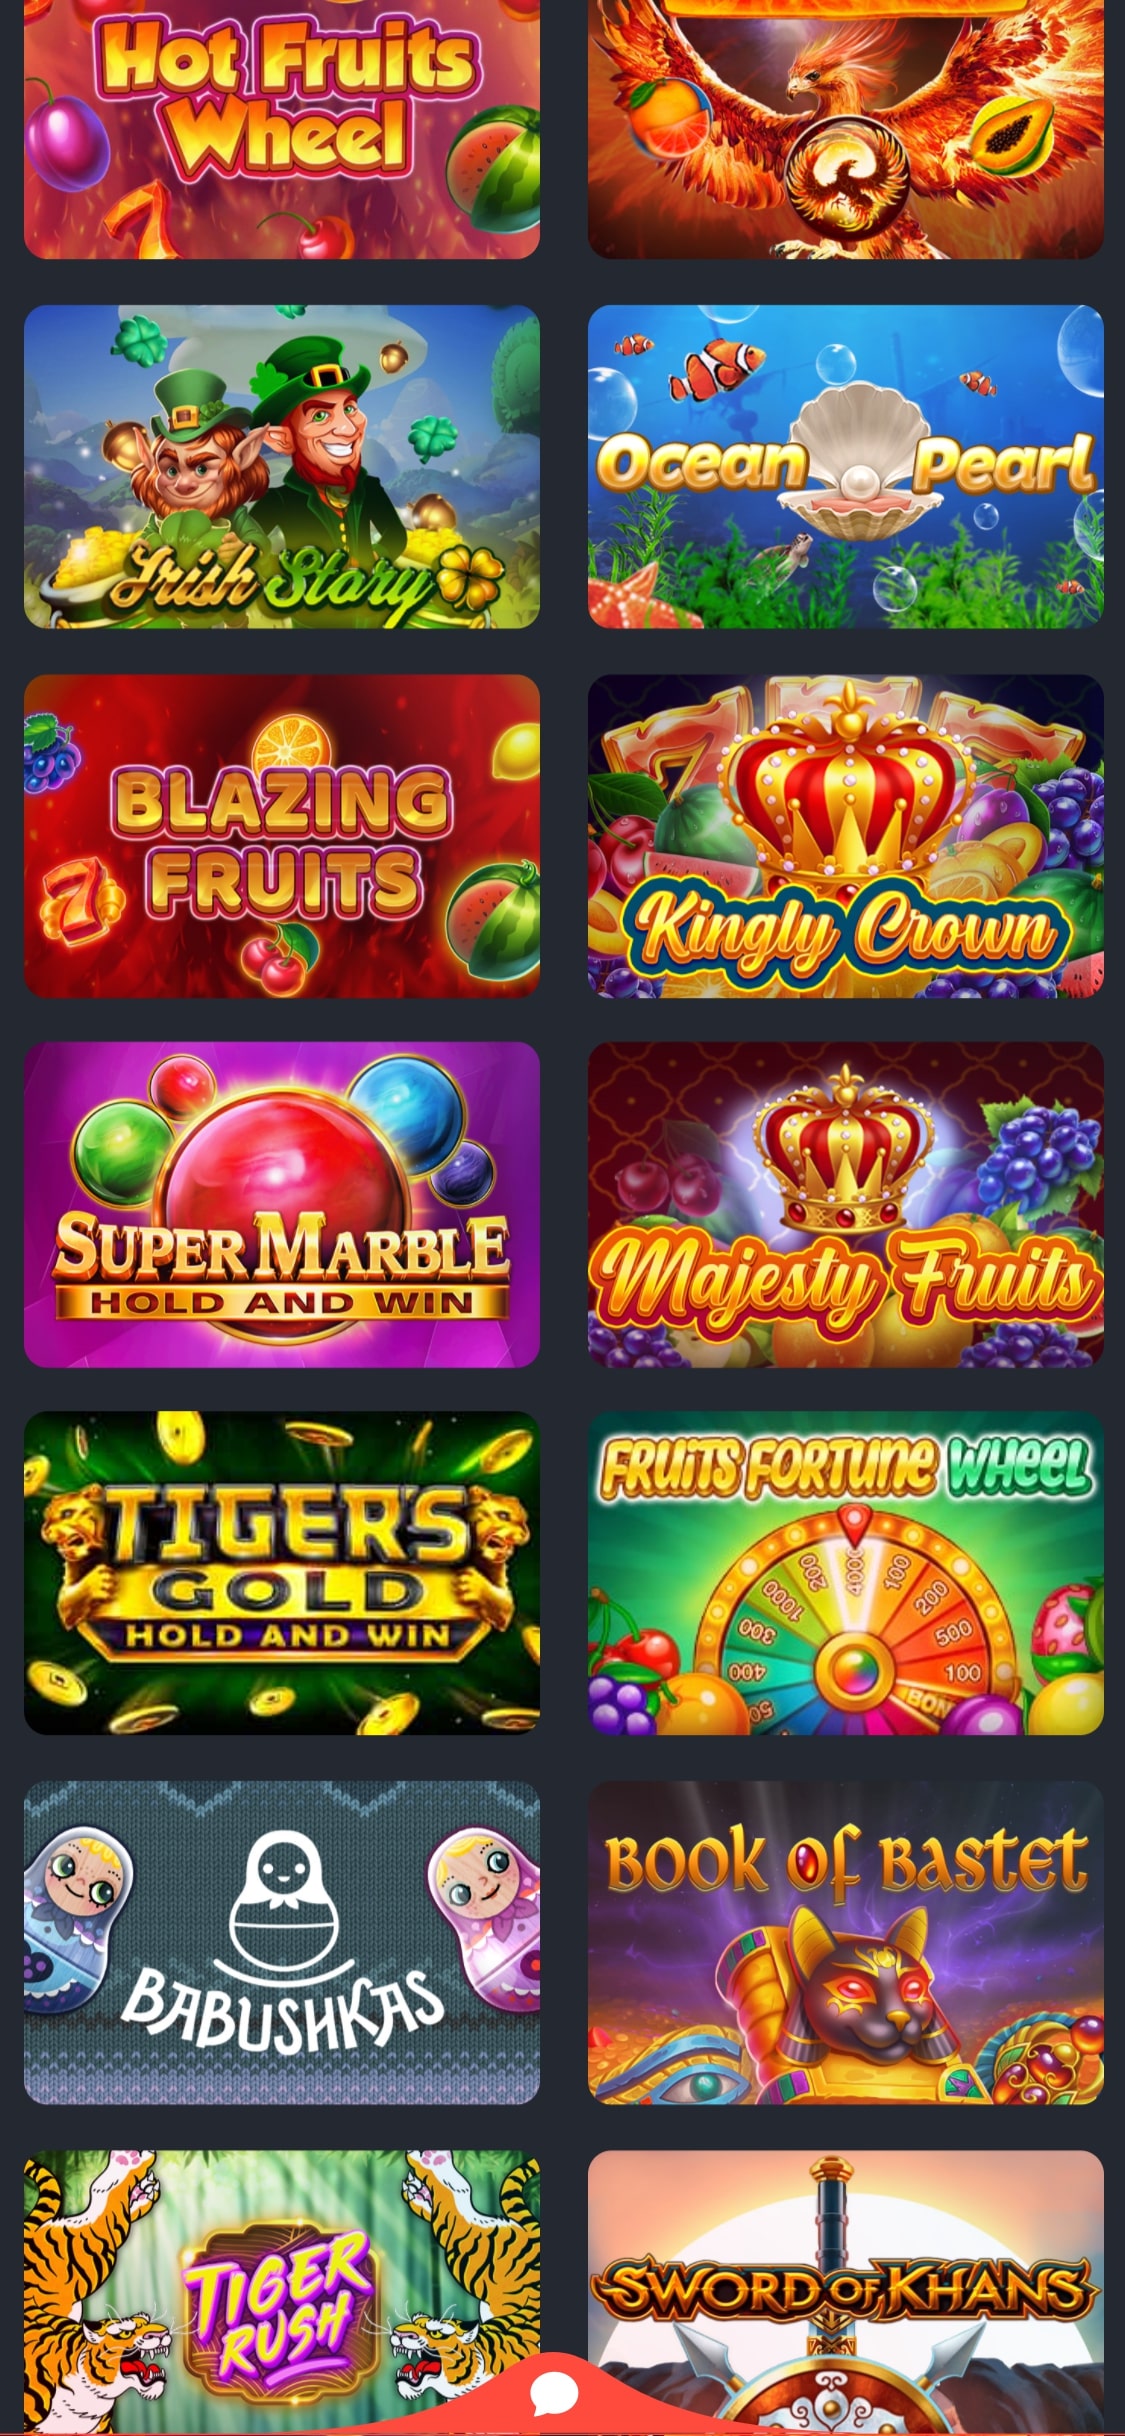 RichPrize Casino Mobile Games Review